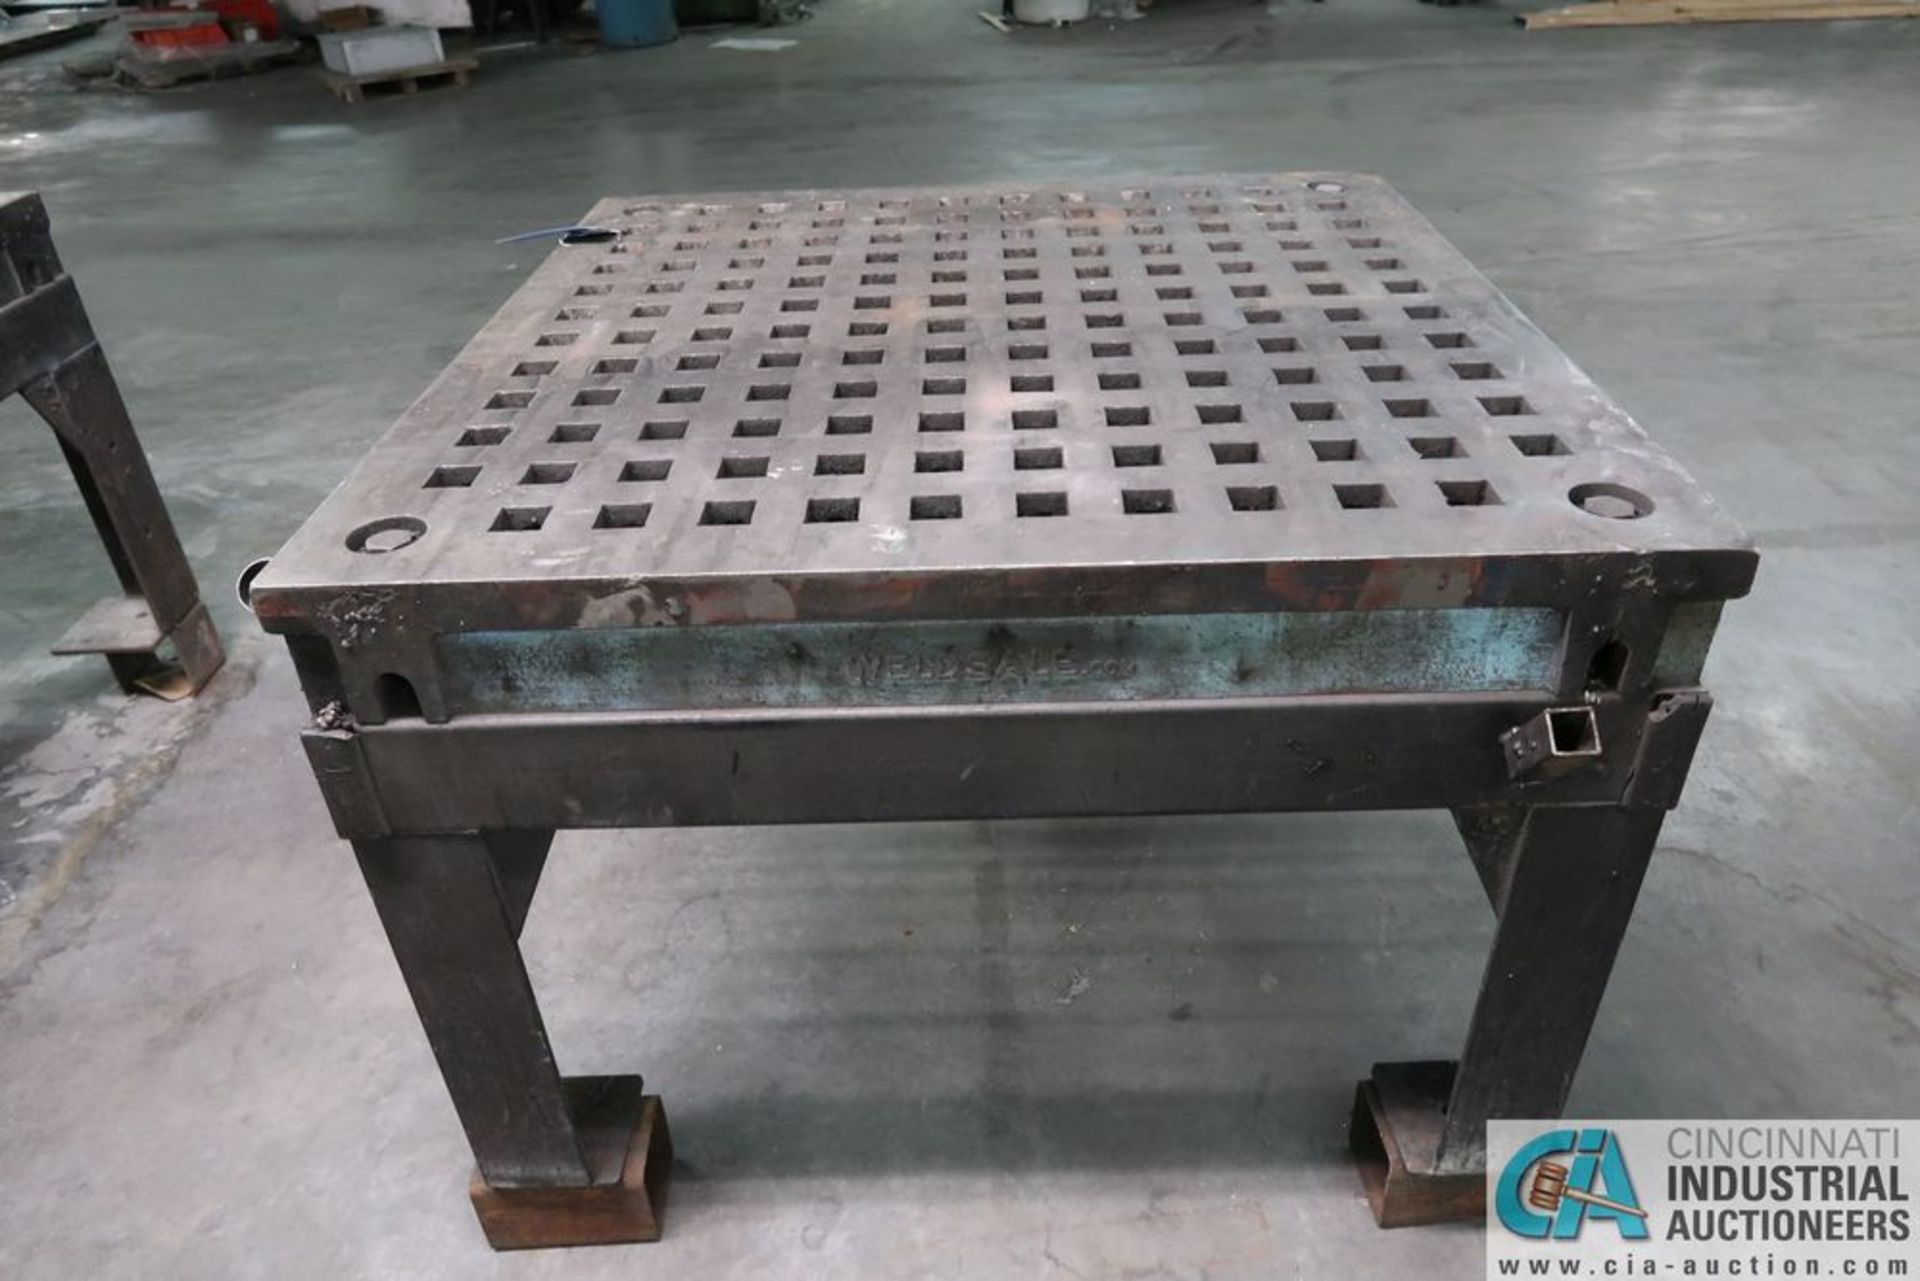 48" X 48" WELDSALE ACORN STYLE WELDING TABLE **LOCATED OFFSITE AT 1001 SPARTA STREET, MCMINNVILLE,